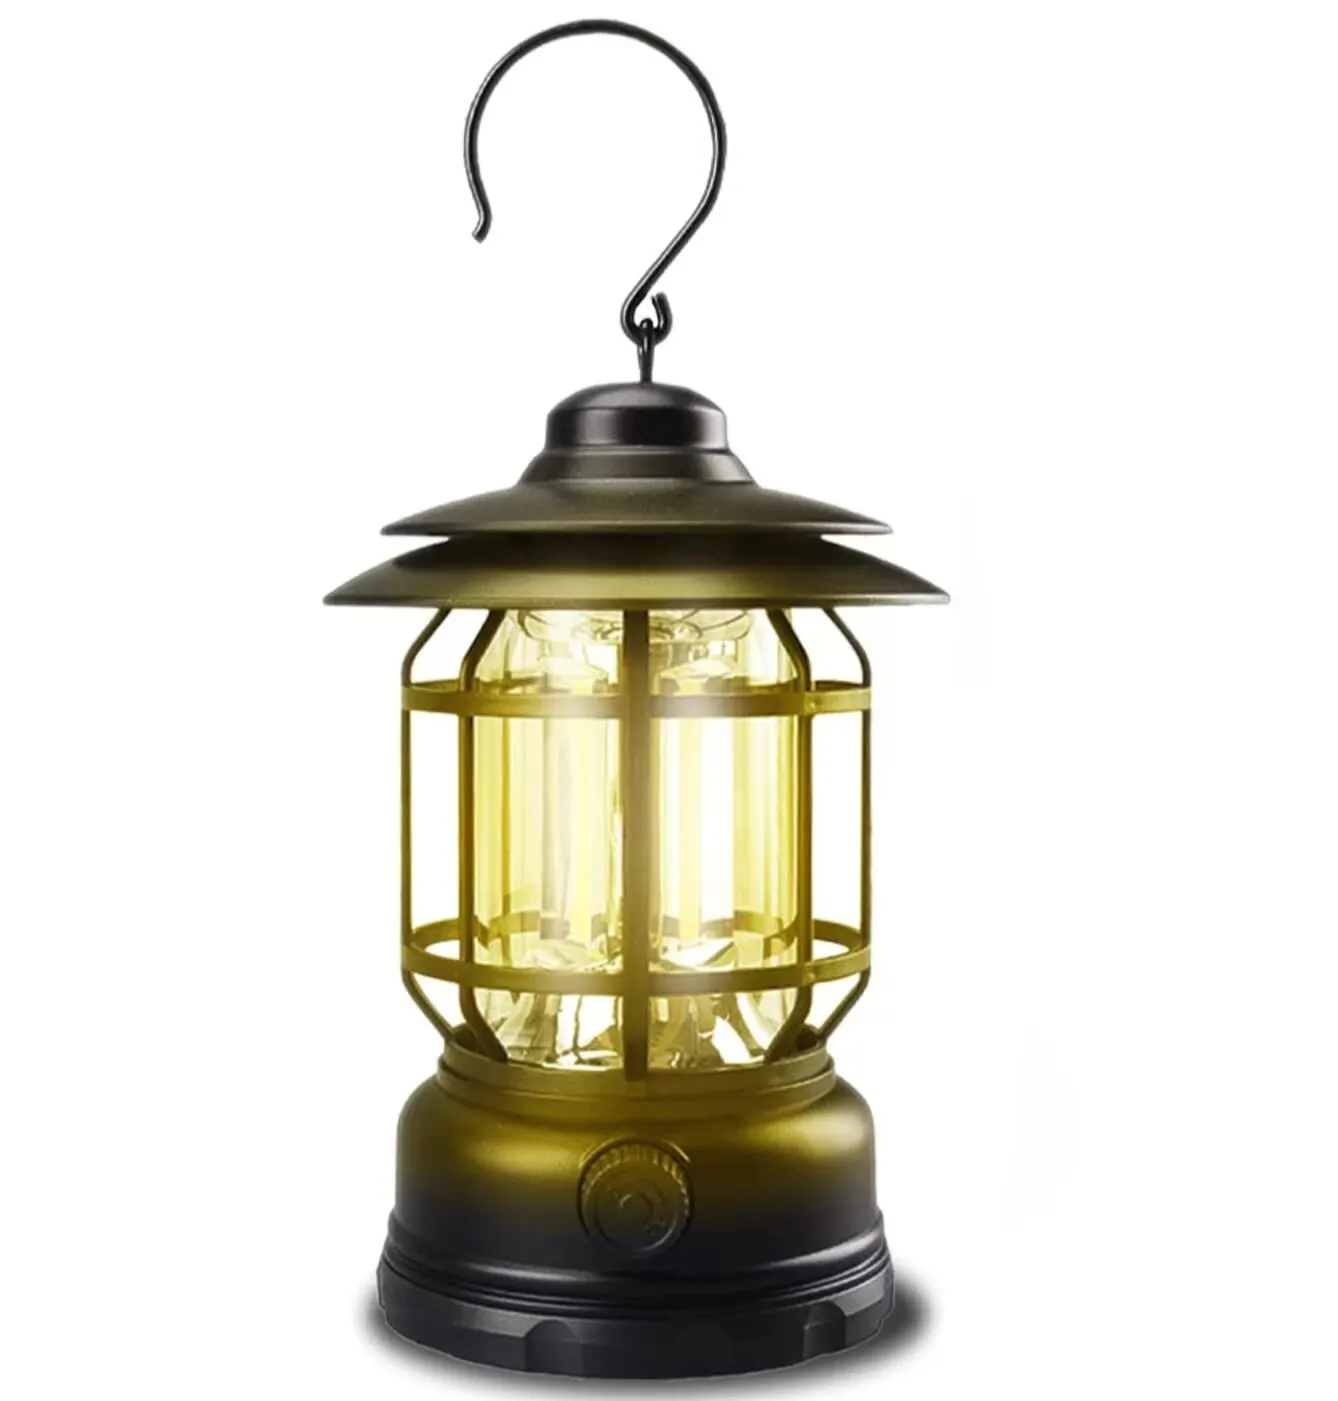 https://ae01.alicdn.com/kf/S5357928834f34836baa54a96810fcc67m/Rechargeable-Camping-Lantern-Stepless-Dimming-COB-Portable-Waterproof-for-Hiking-Fishing-Emergency-Home-Power-Outages-Indoor.jpg